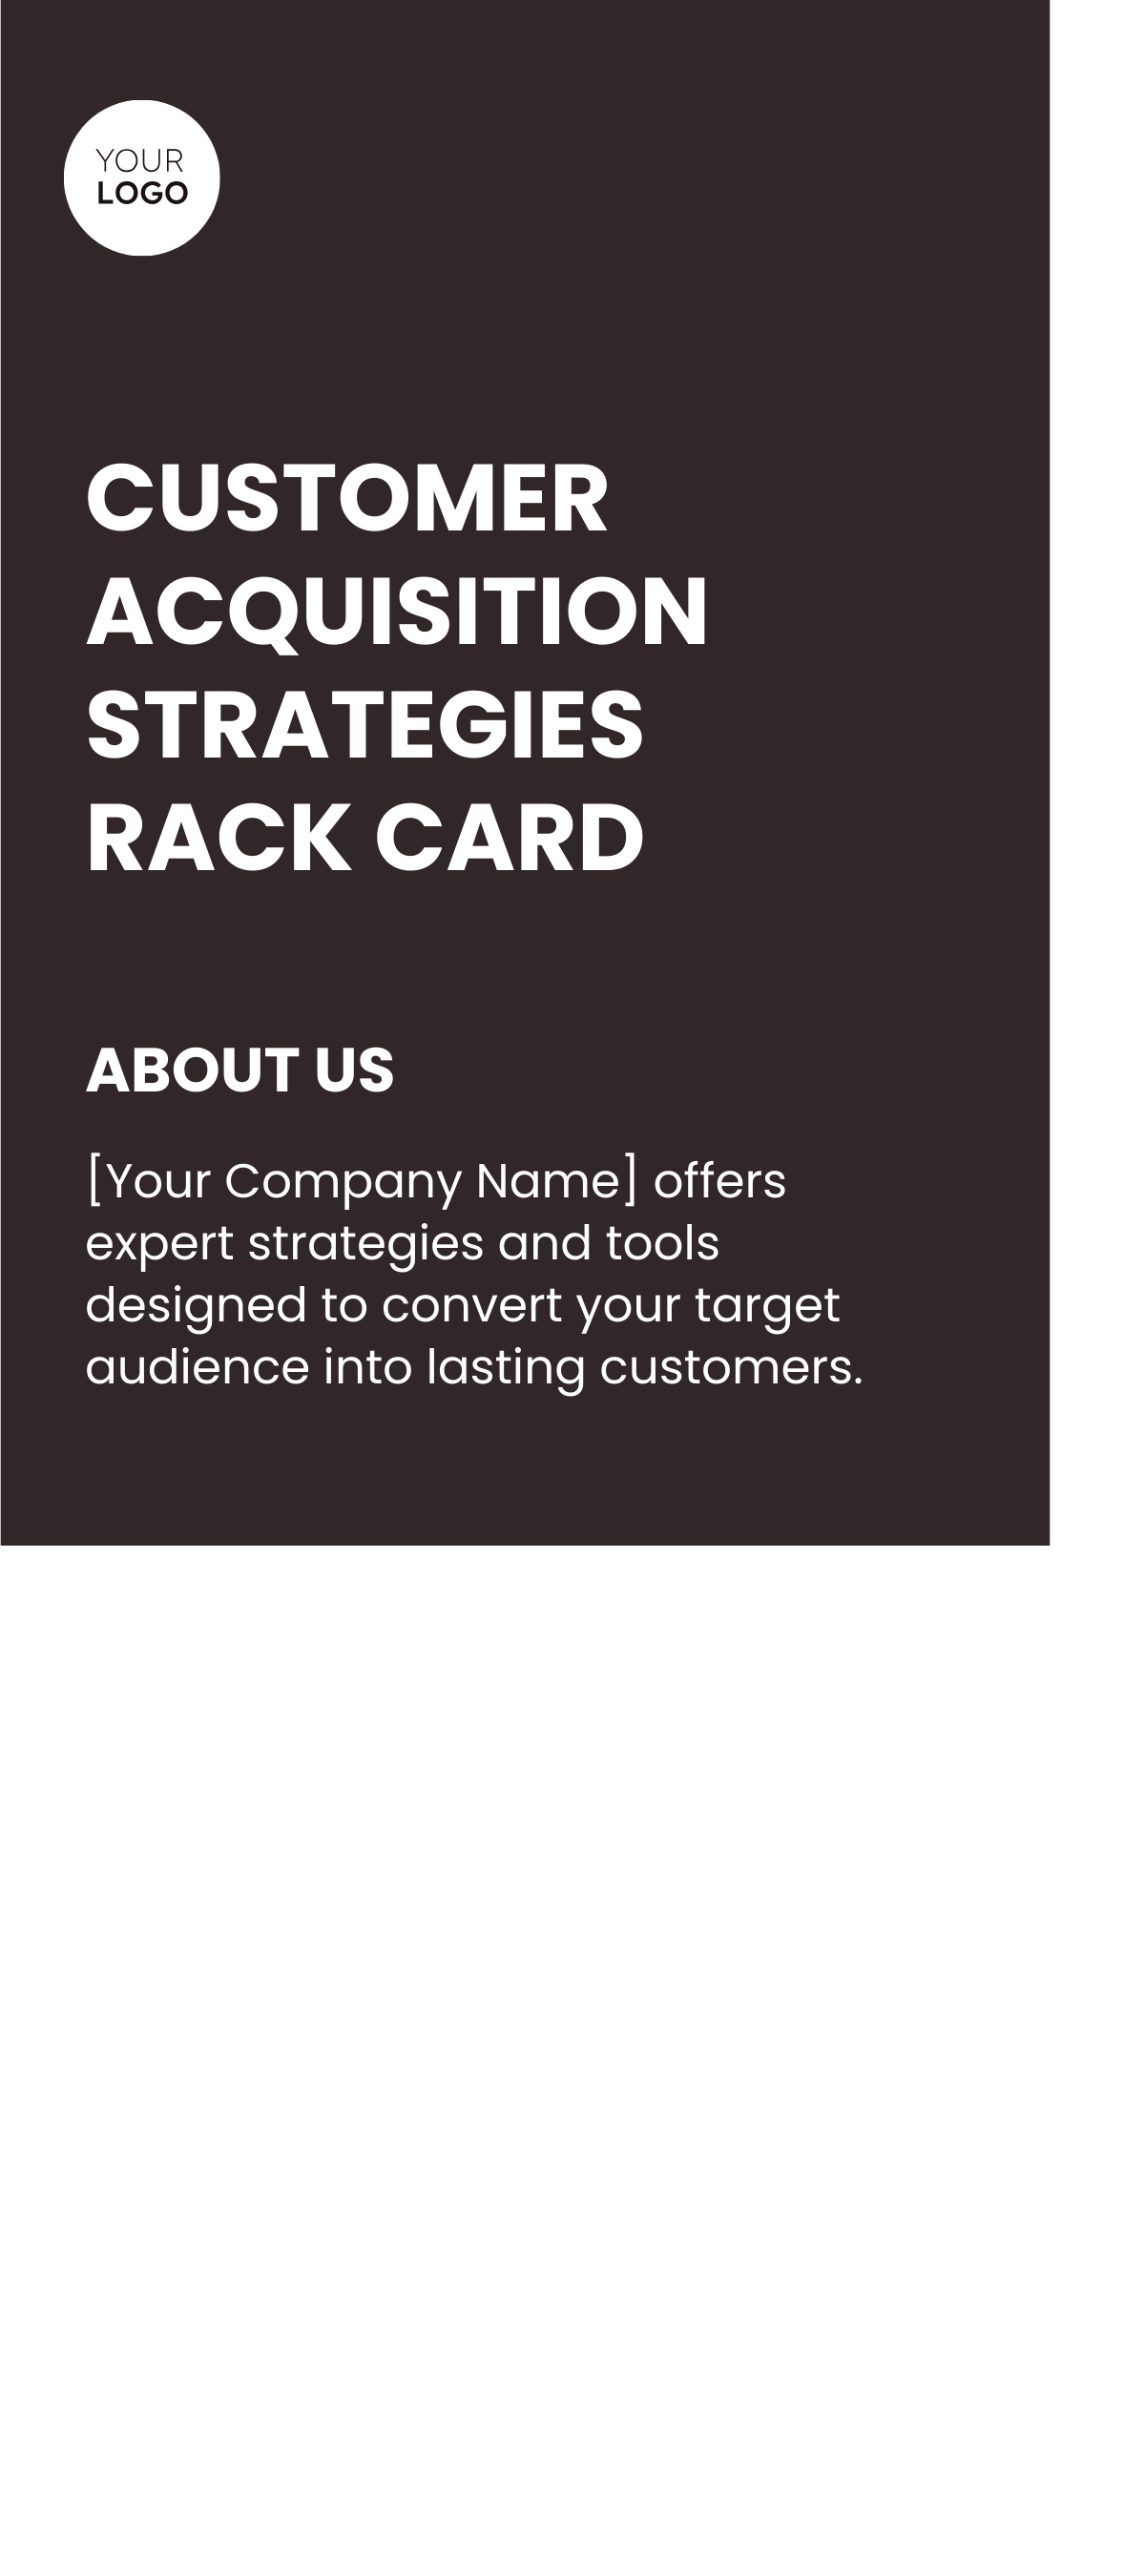 Customer Acquisition Strategies Rack Card Template